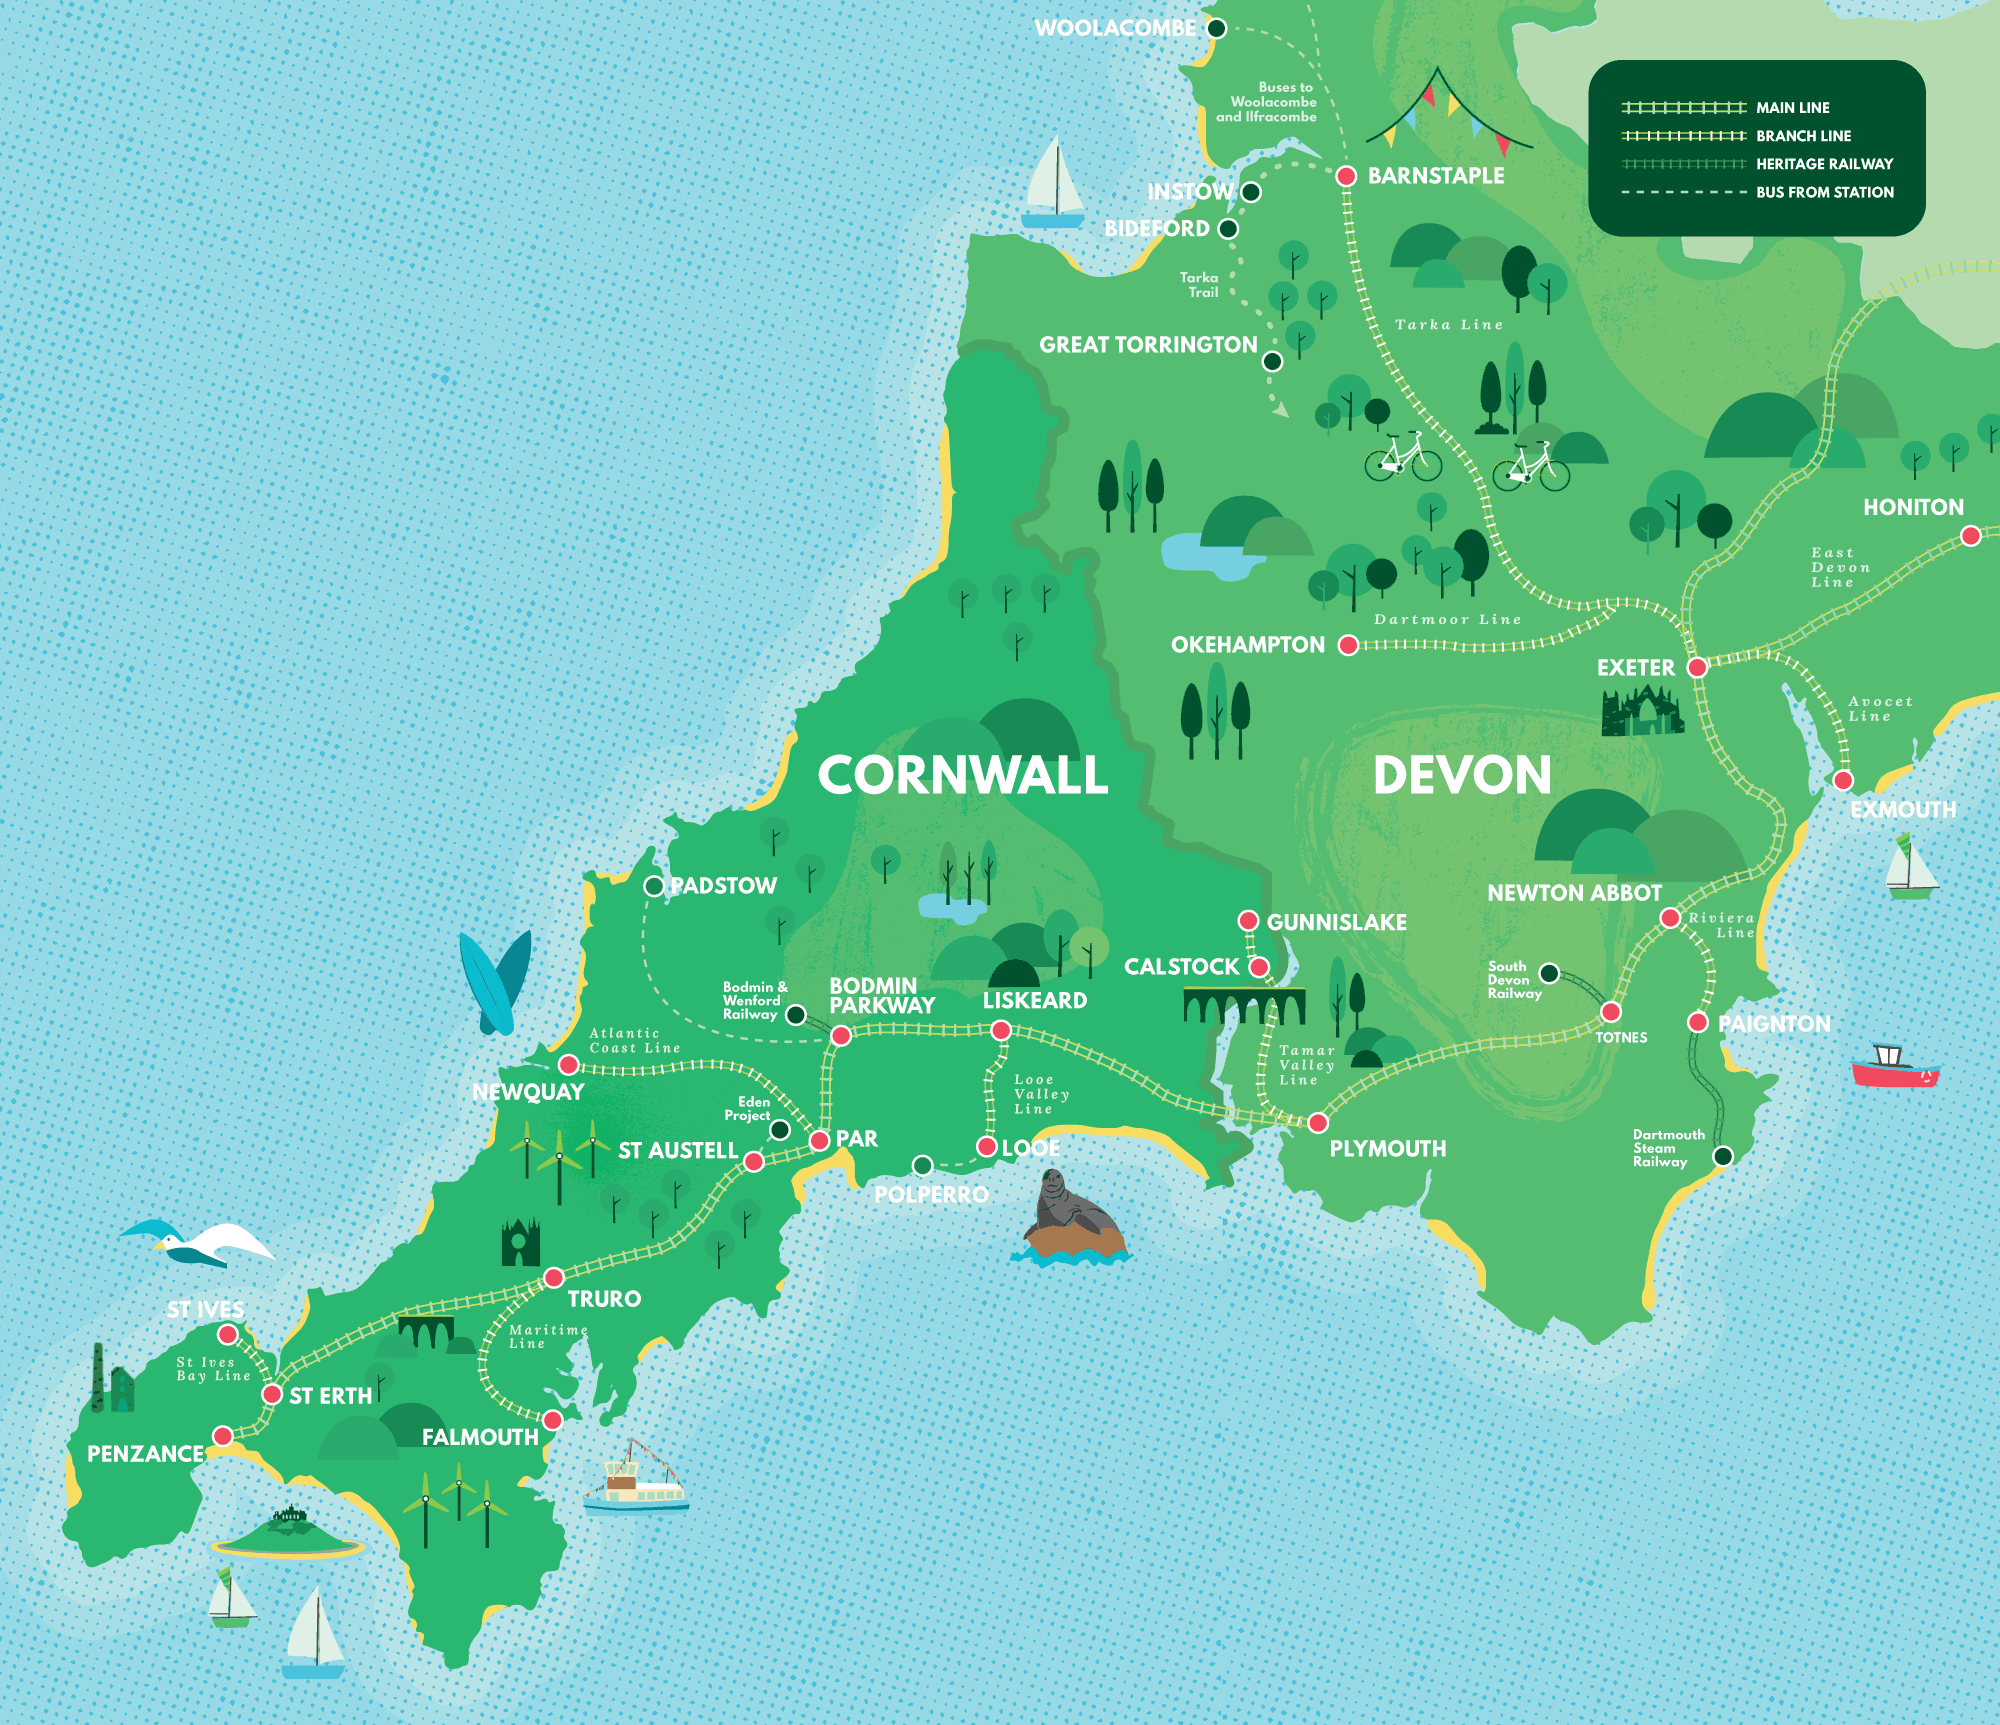 Overview map showing Devon and Cornwall's railways